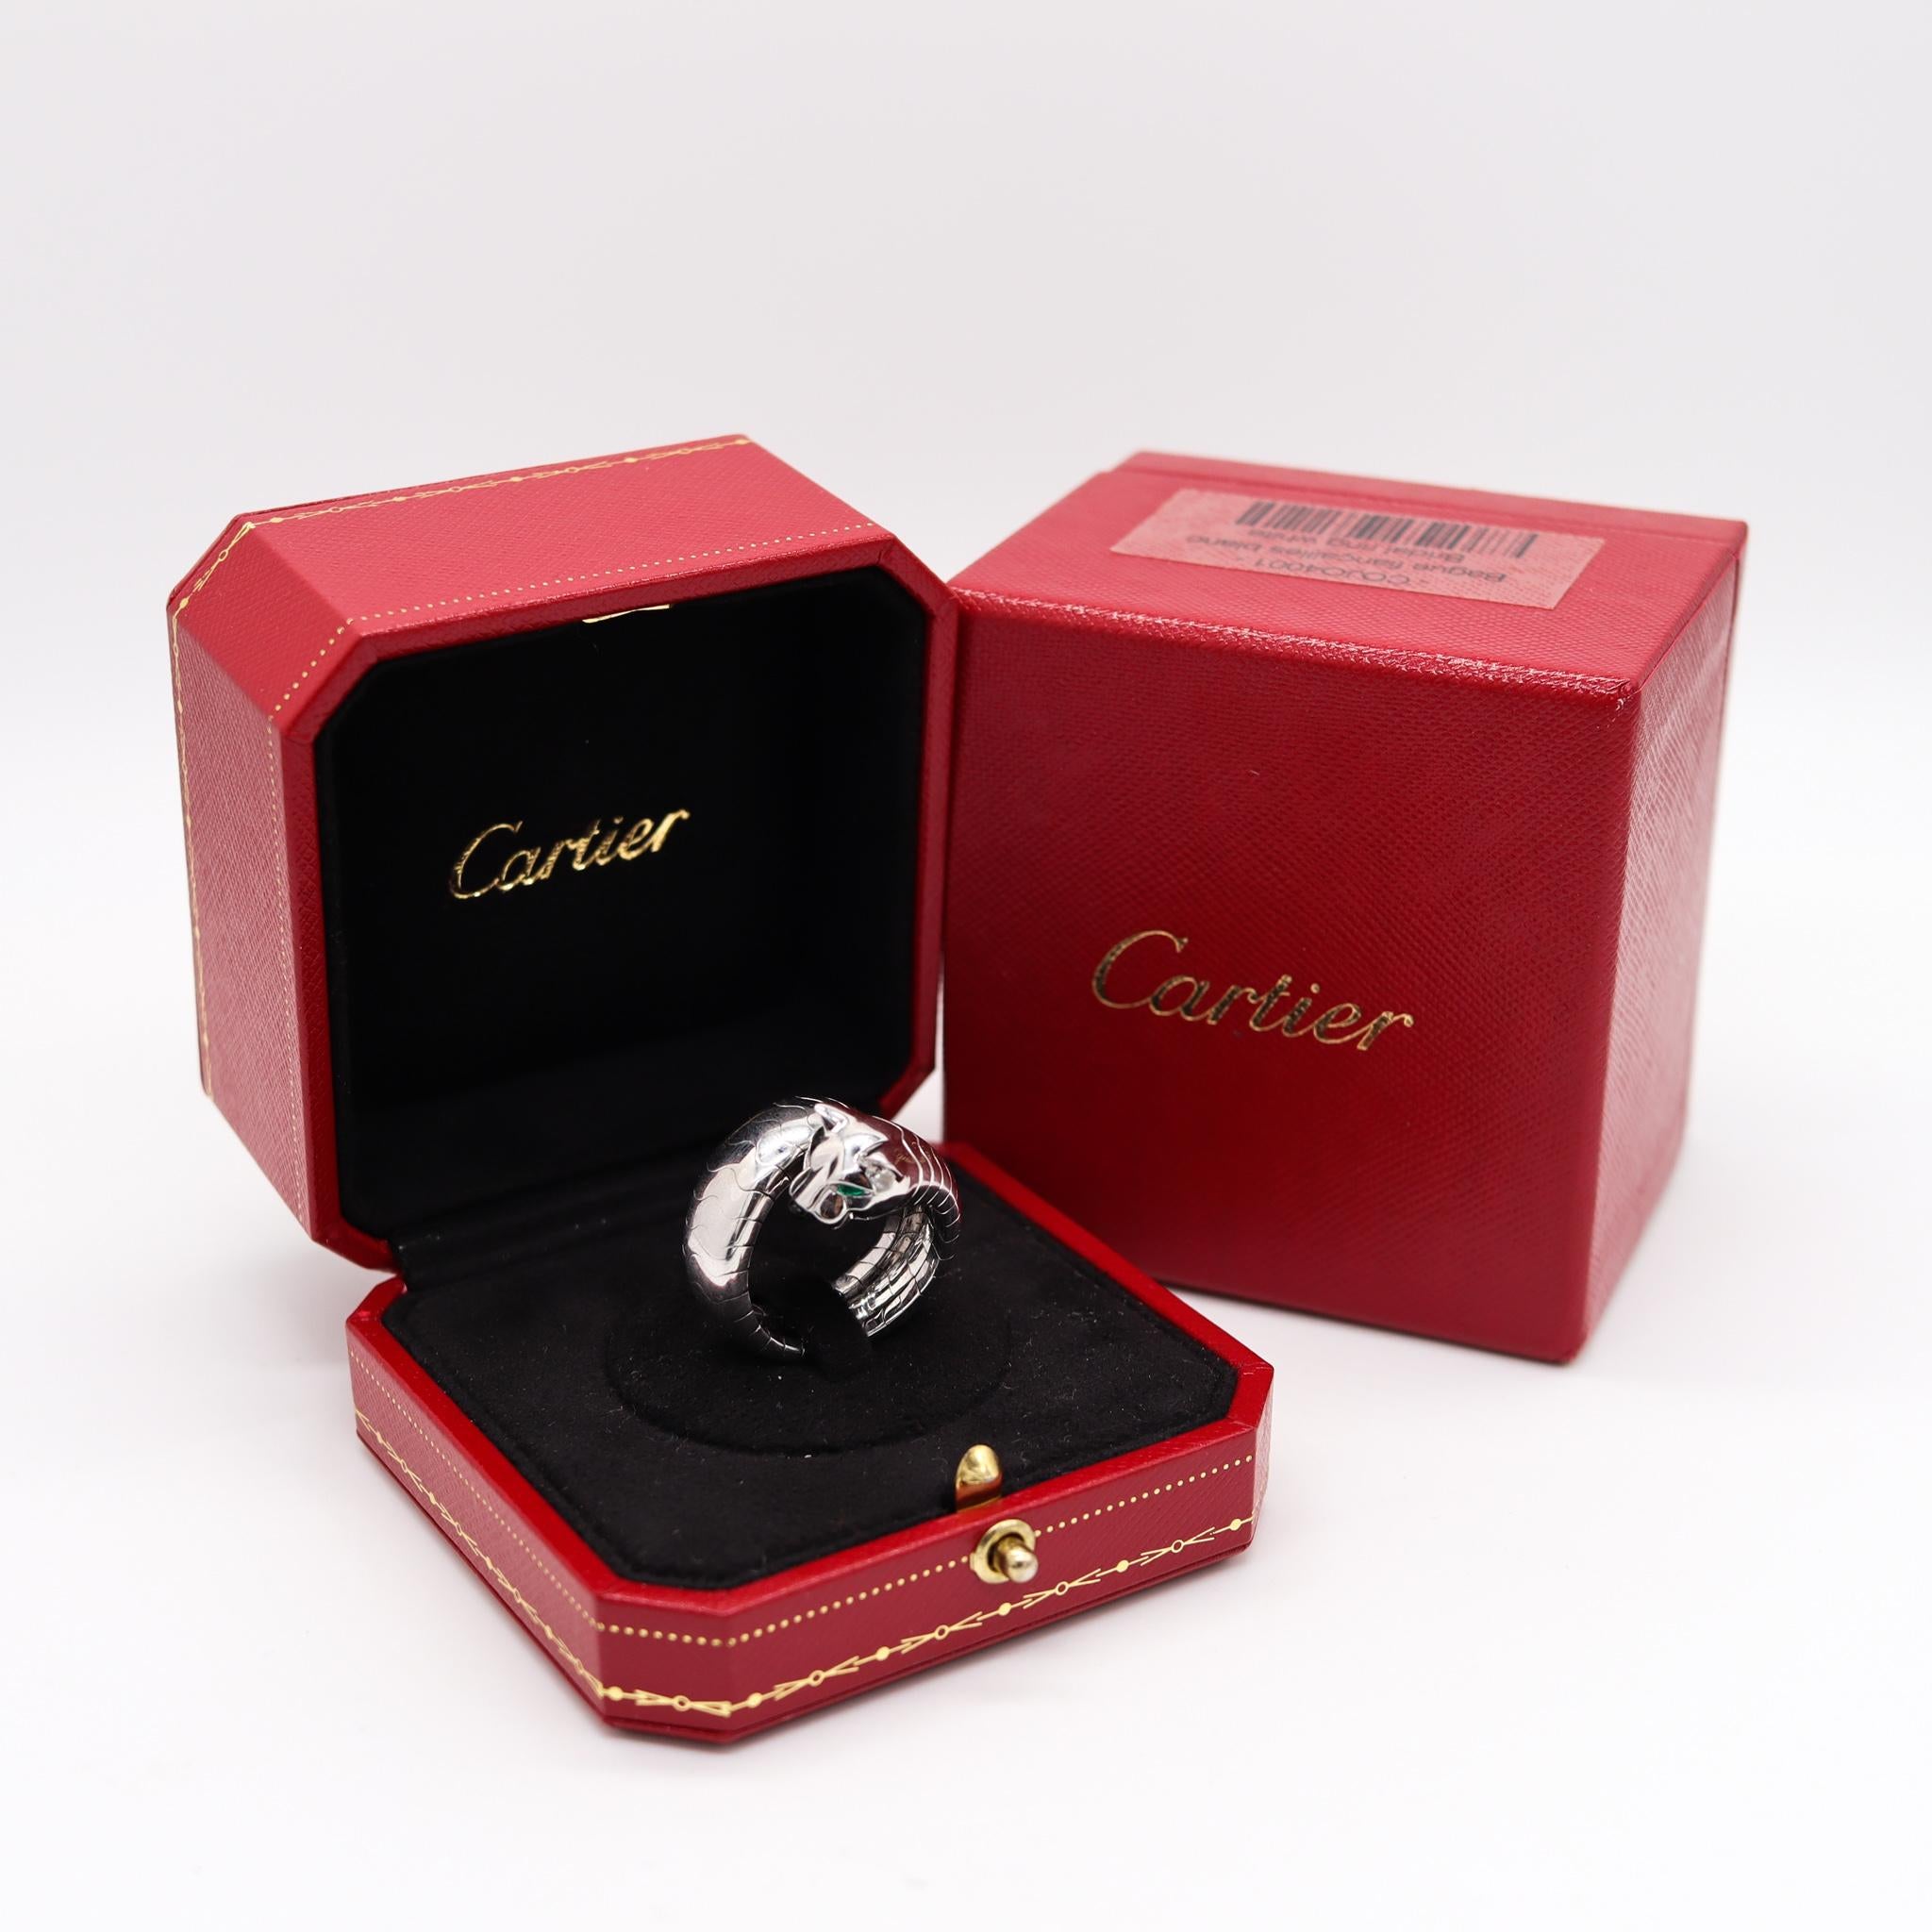 Lakarda panther ring designed by Cartier.

Beautiful and exotic ring, created in Paris France by the jewelry house of Cartier. This is the bold panther model named Lakarda, crafted in solid white gold of 18 karats with high polished finish.

The